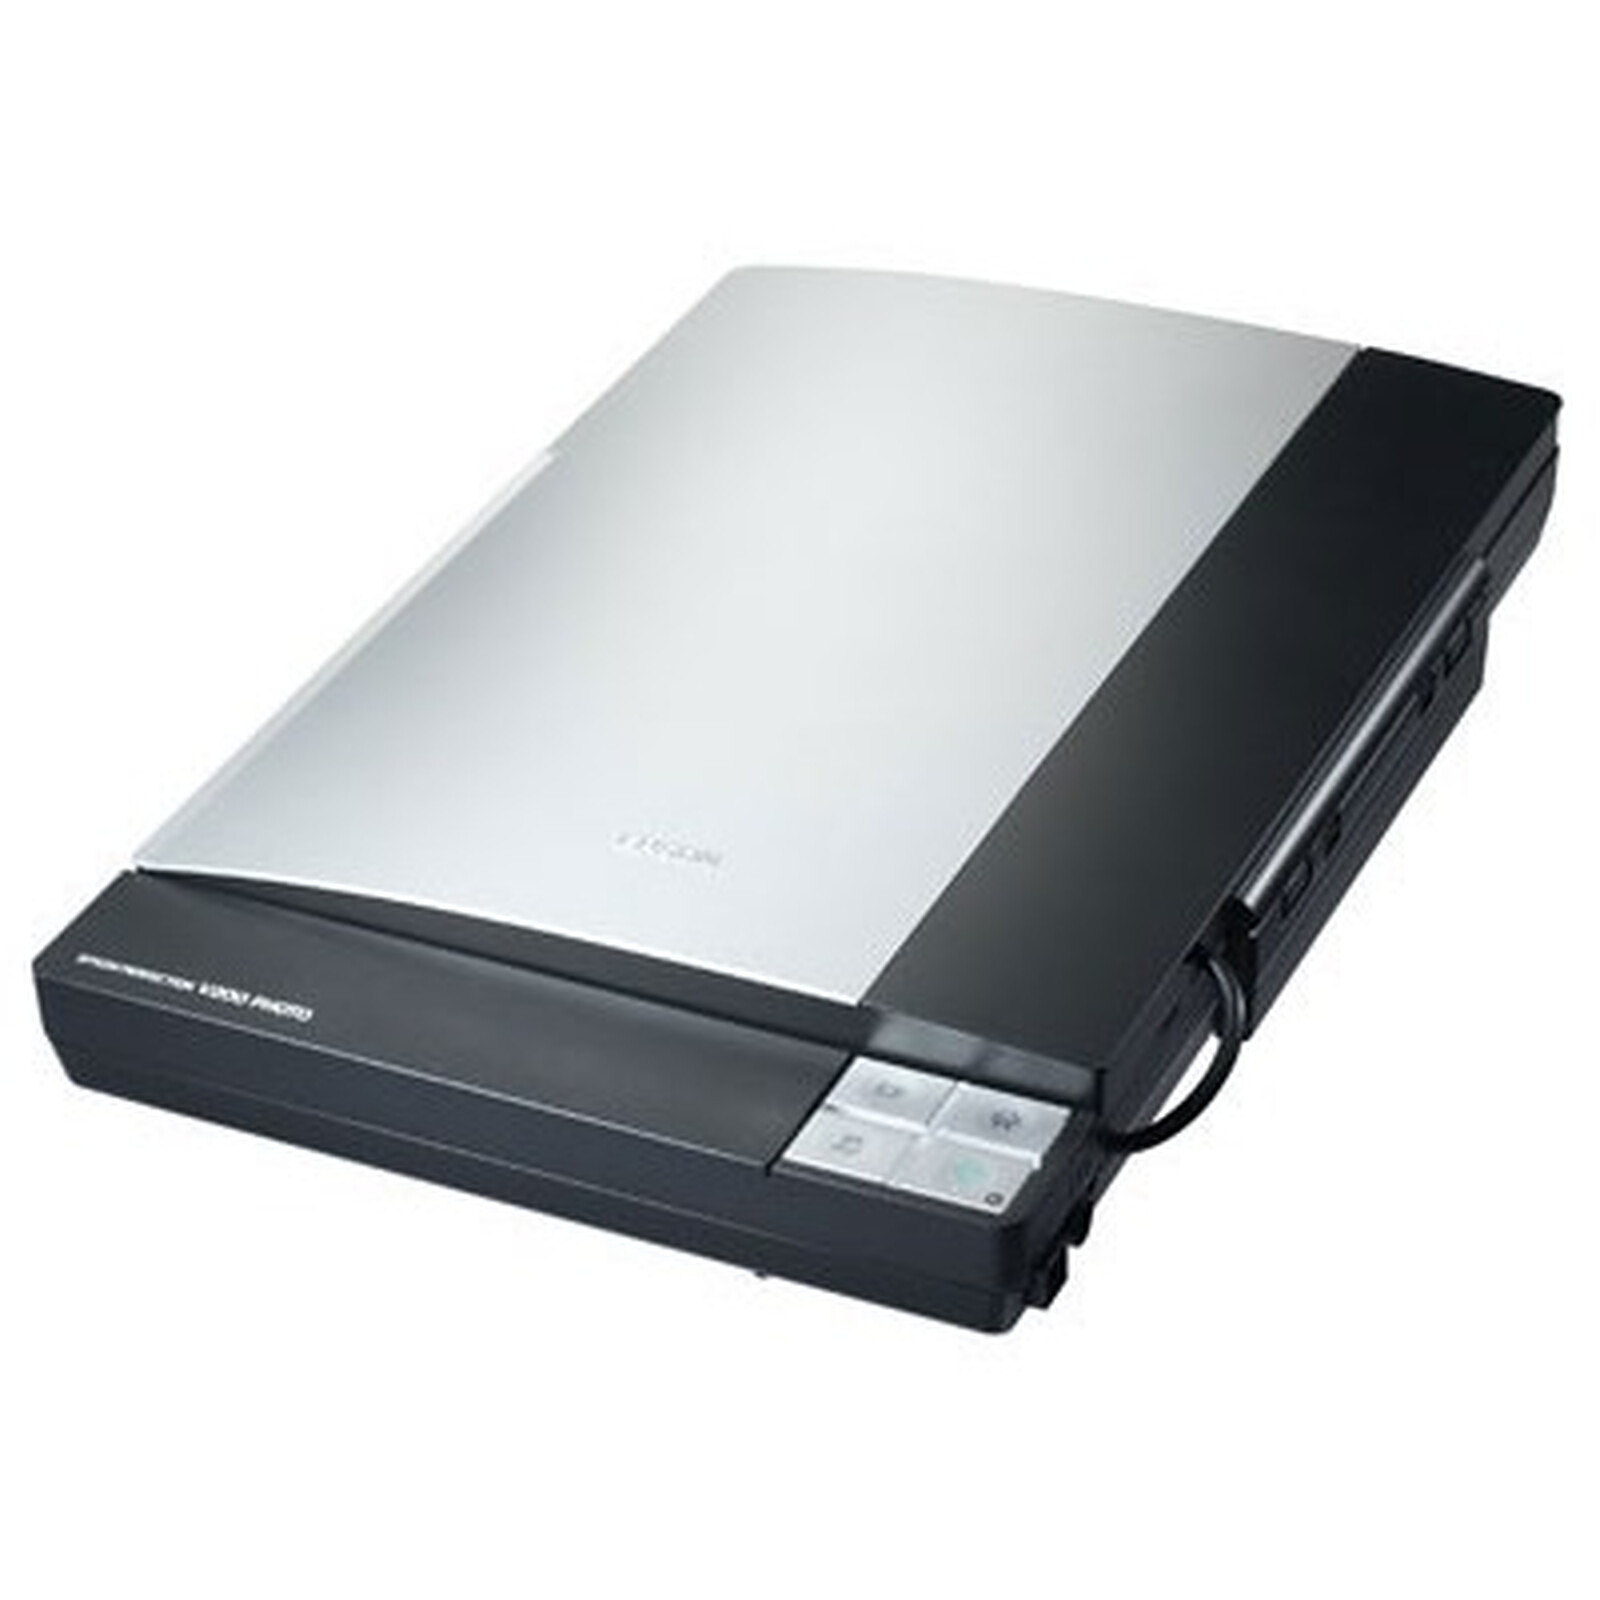 epson perfection v200 linux